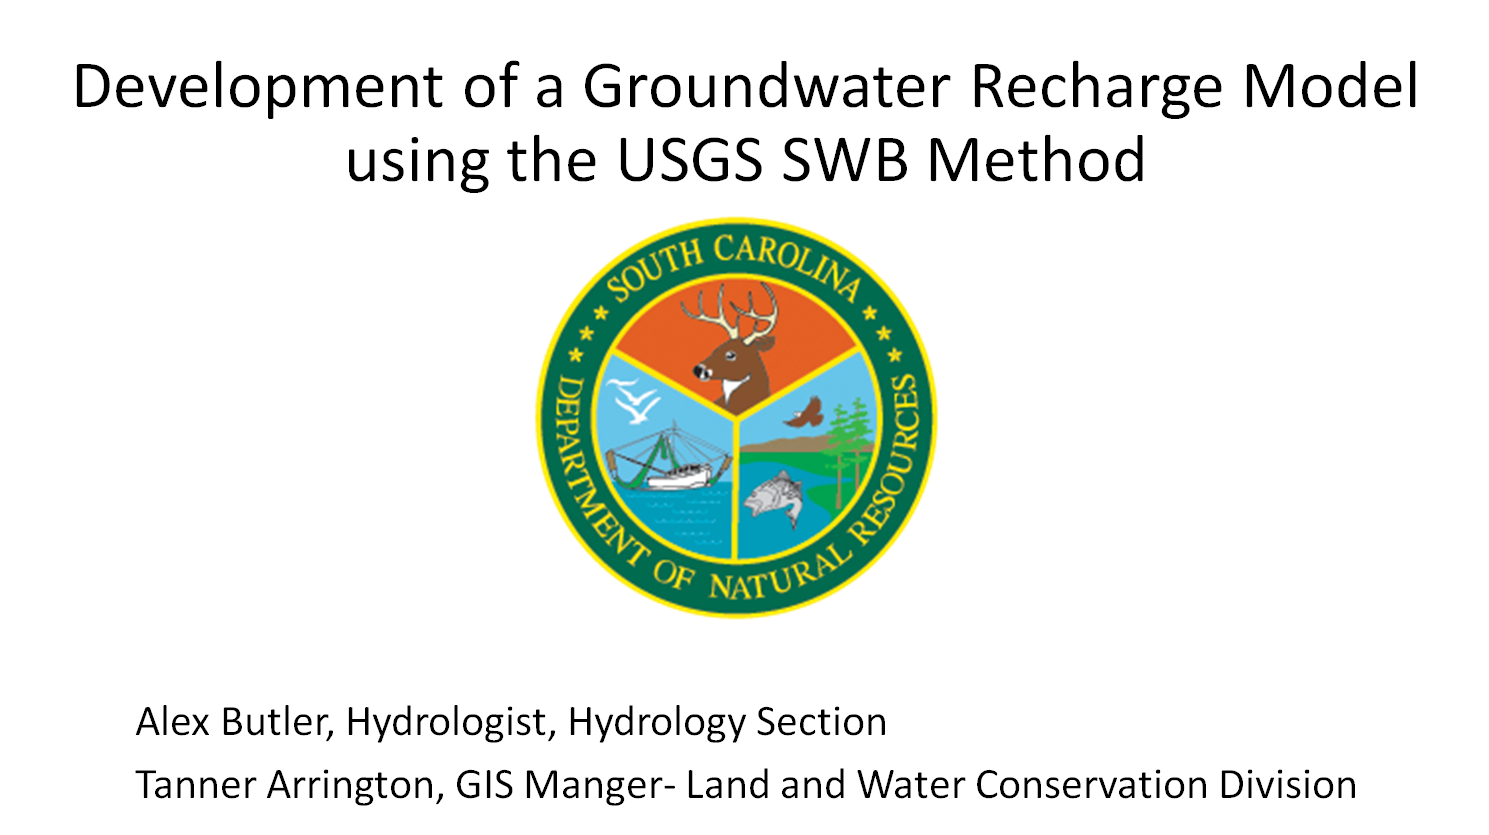 Development of a Groundwater Recharge Model using the USGS SWB Method